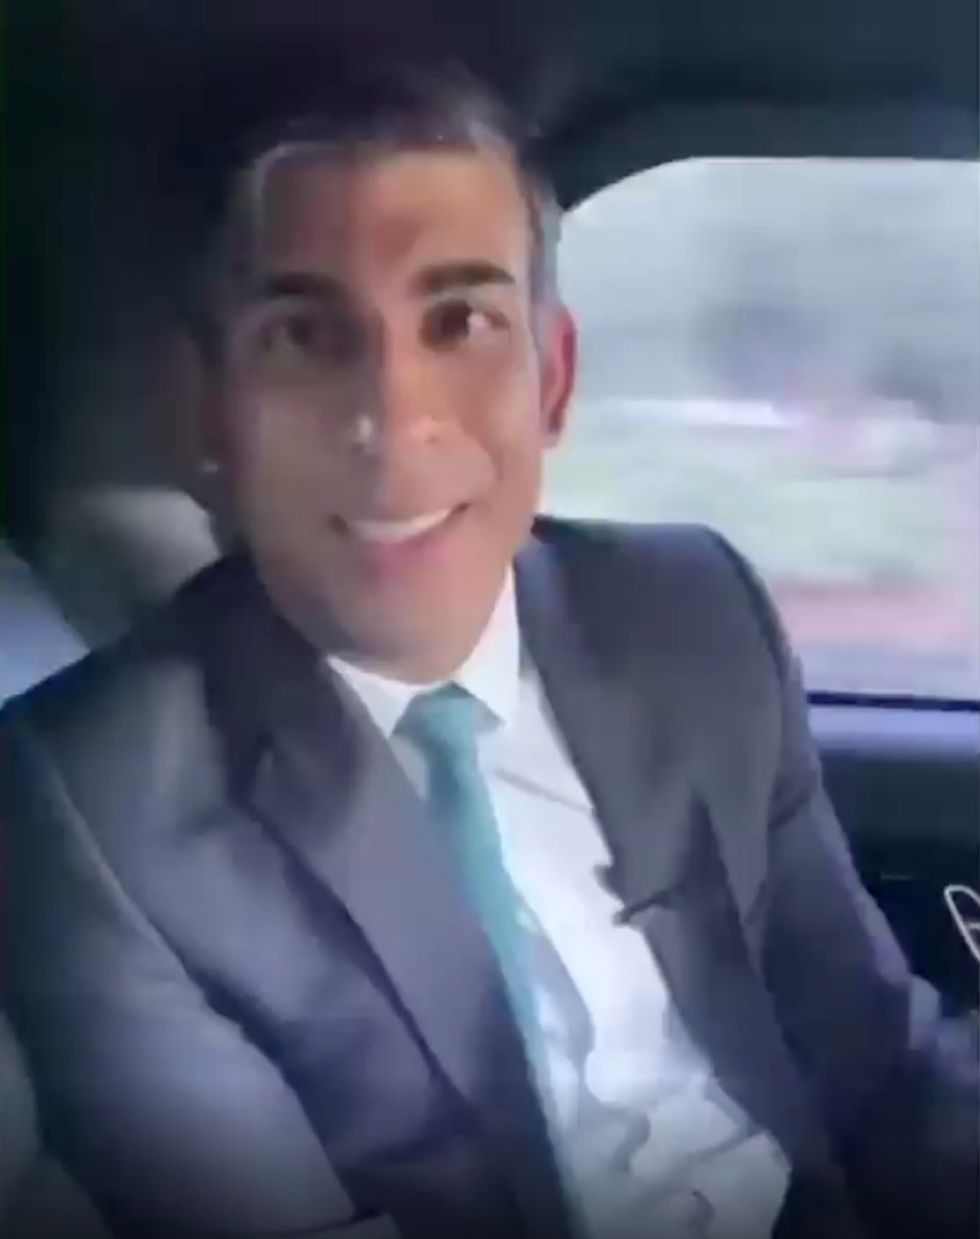 Rishi Sunak may have got himself in trouble with his latest gaffe